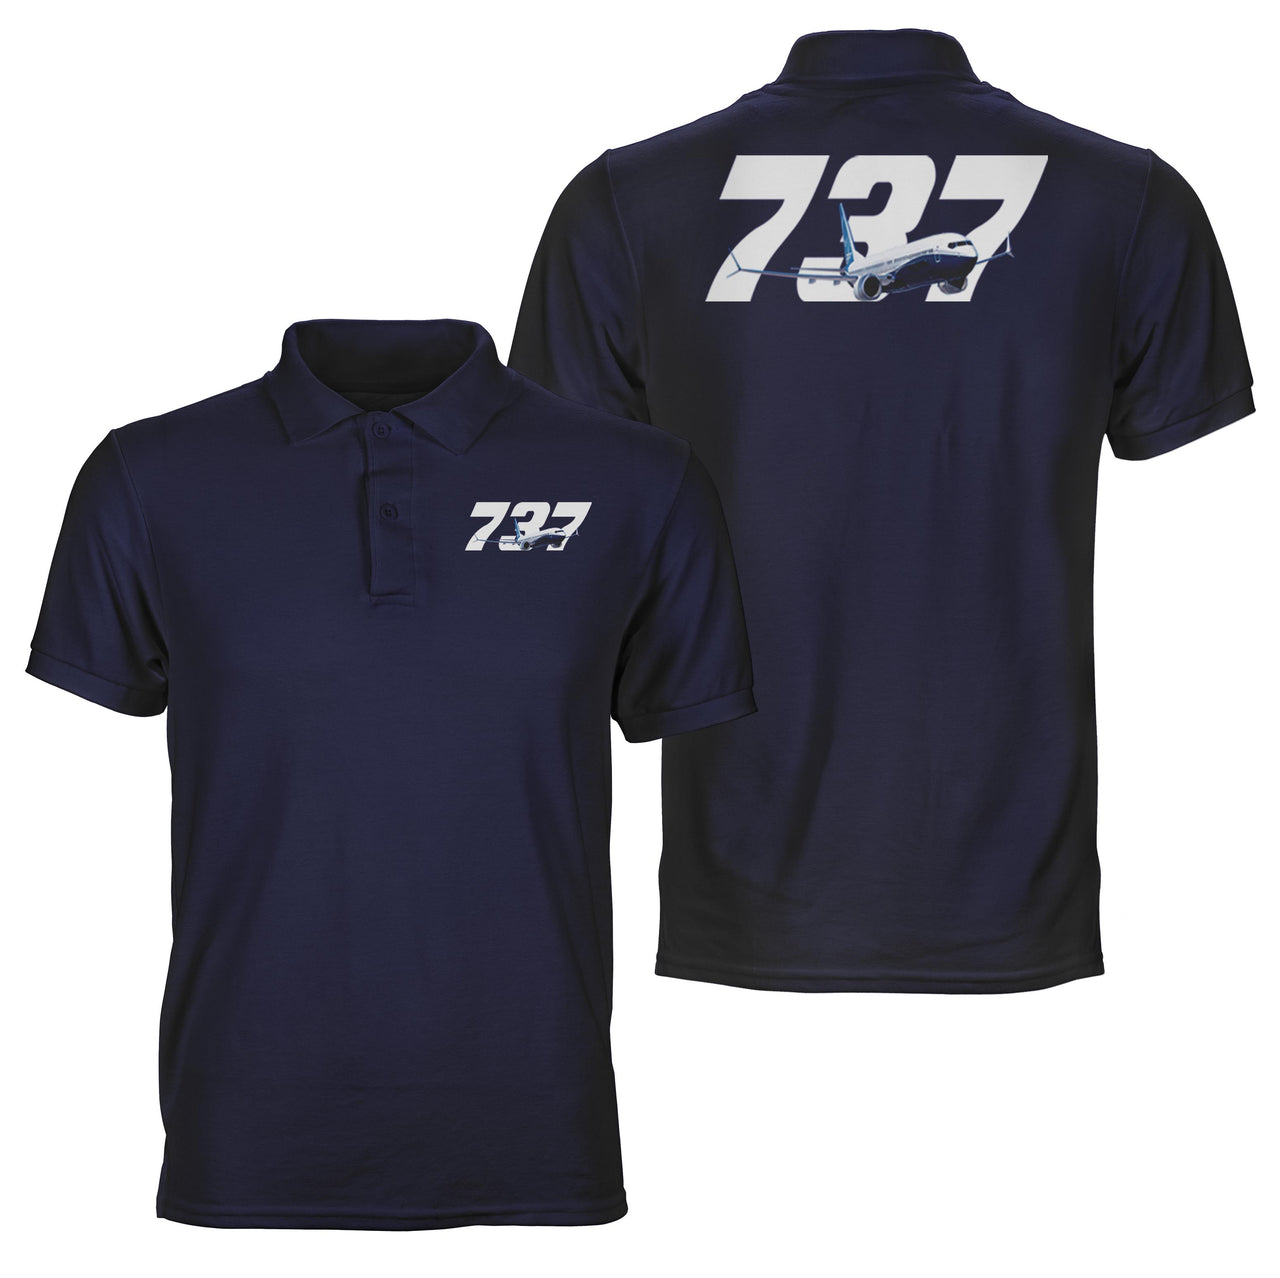 Super Boeing 737 Designed Double Side Polo T-Shirts